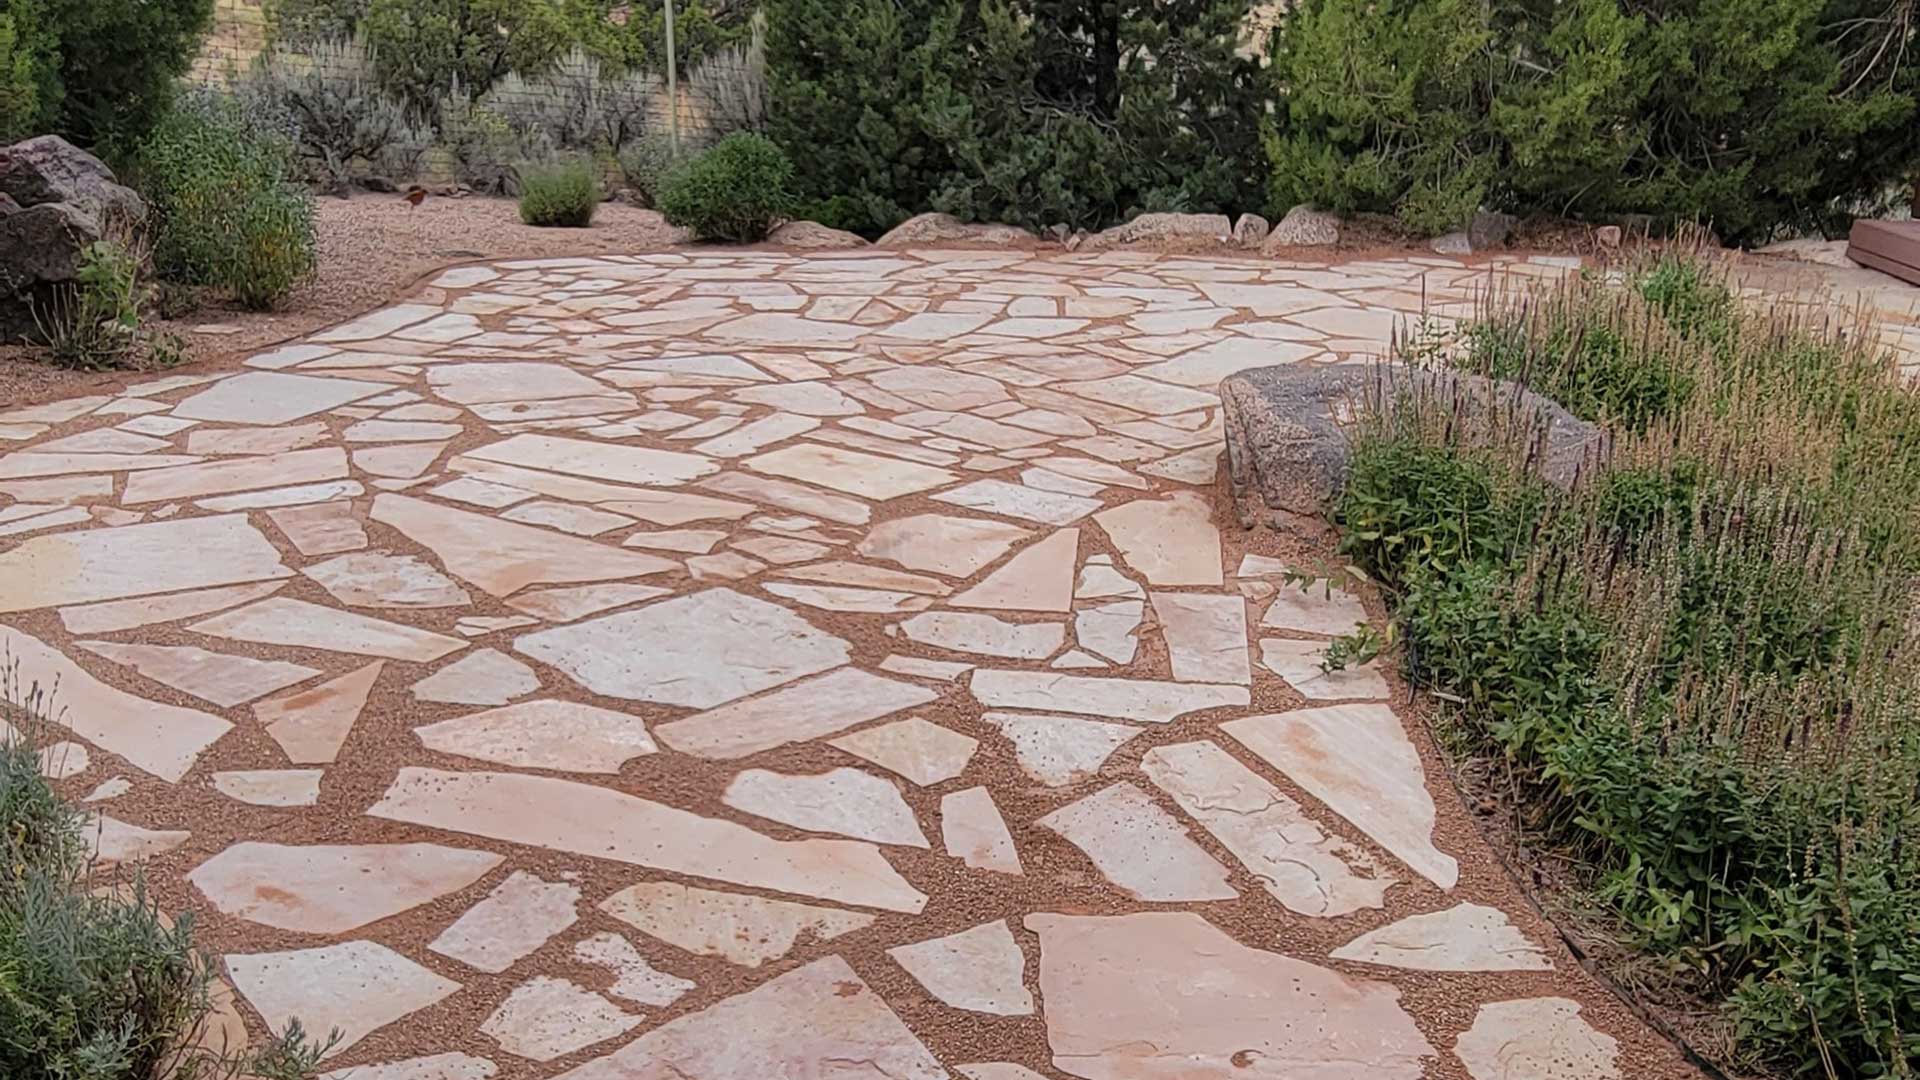 A new flagstone patio with perfect landscaping around it.